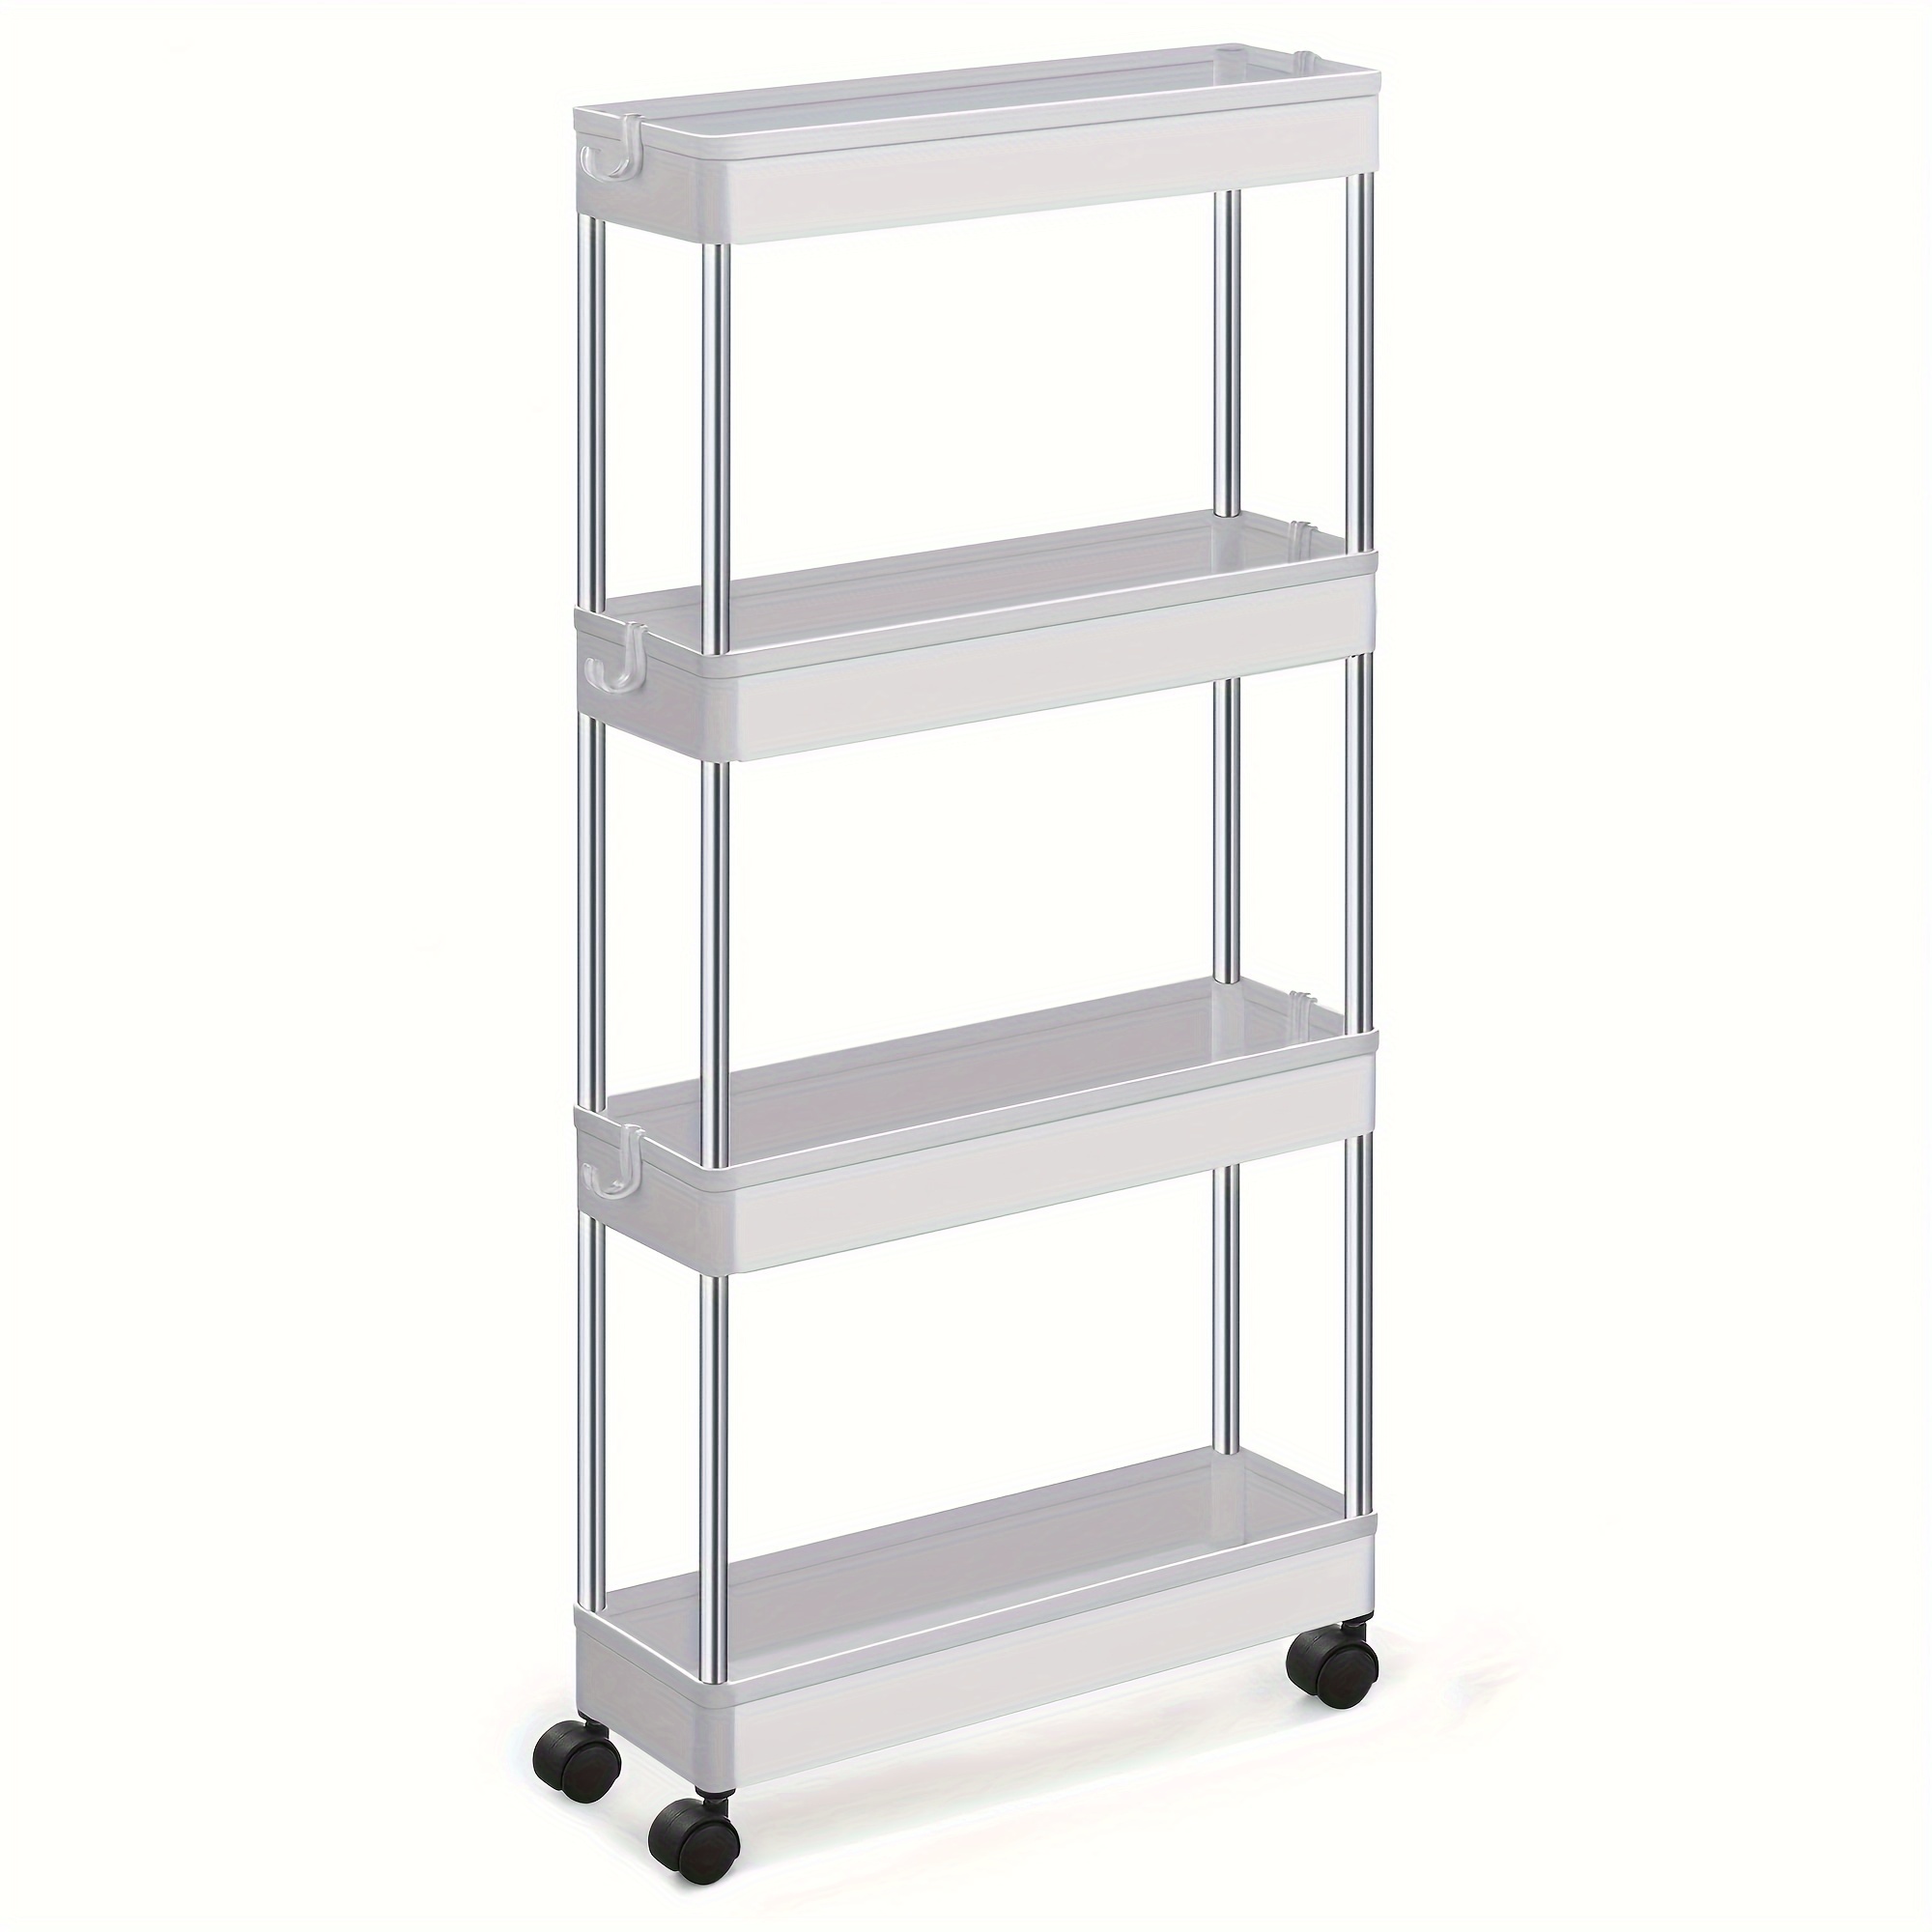 Dropship Free Shipping 3-Tire Rolling Cart Organizer Unit With Wheels Narrow  Slim Container Storage Cabinet For Bathroom Bedroom YJ to Sell Online at a  Lower Price